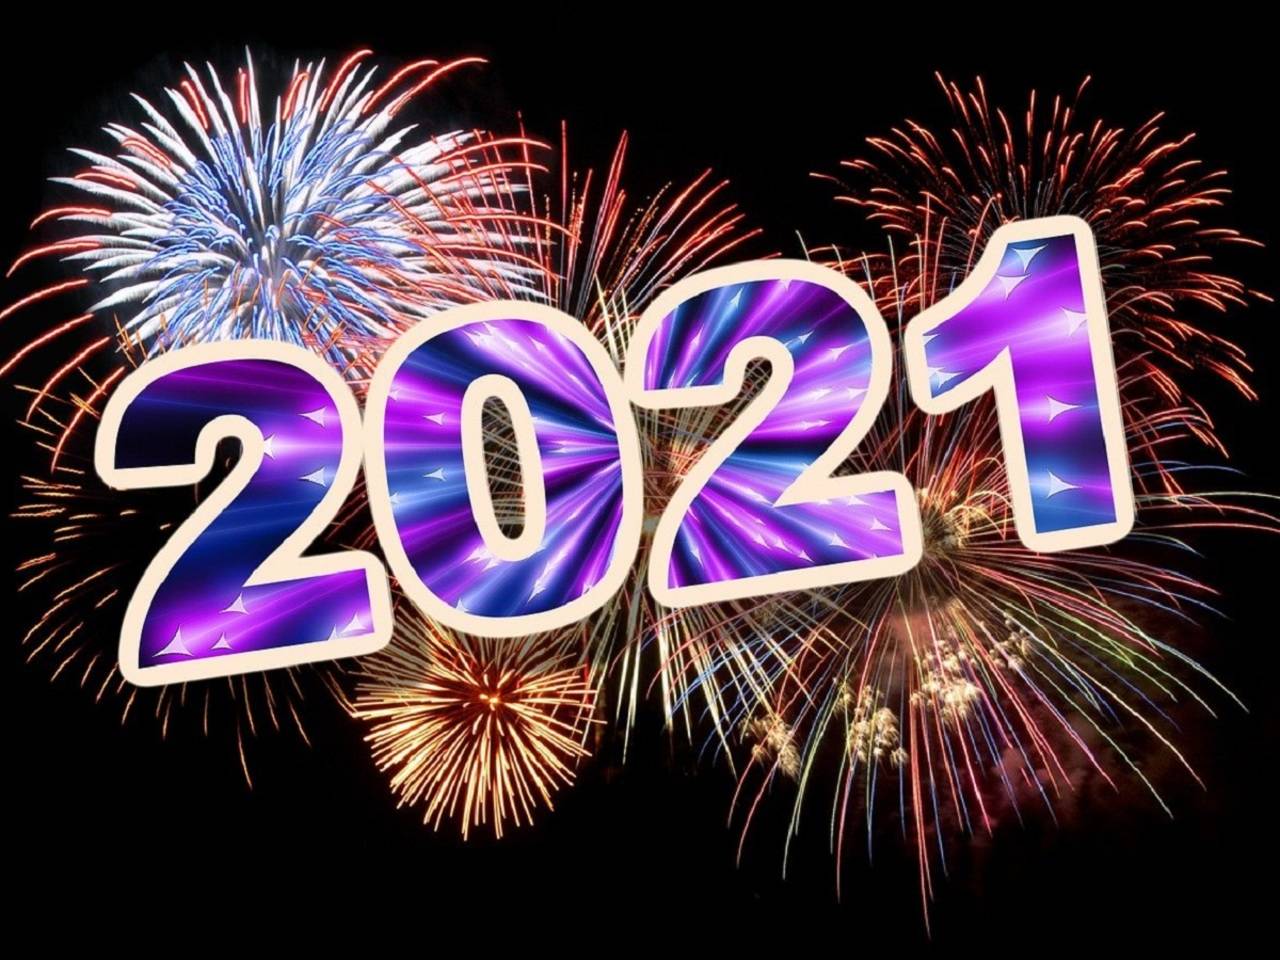  Full Hd Happy New Year 2021 Wallpaper  MyGodImages